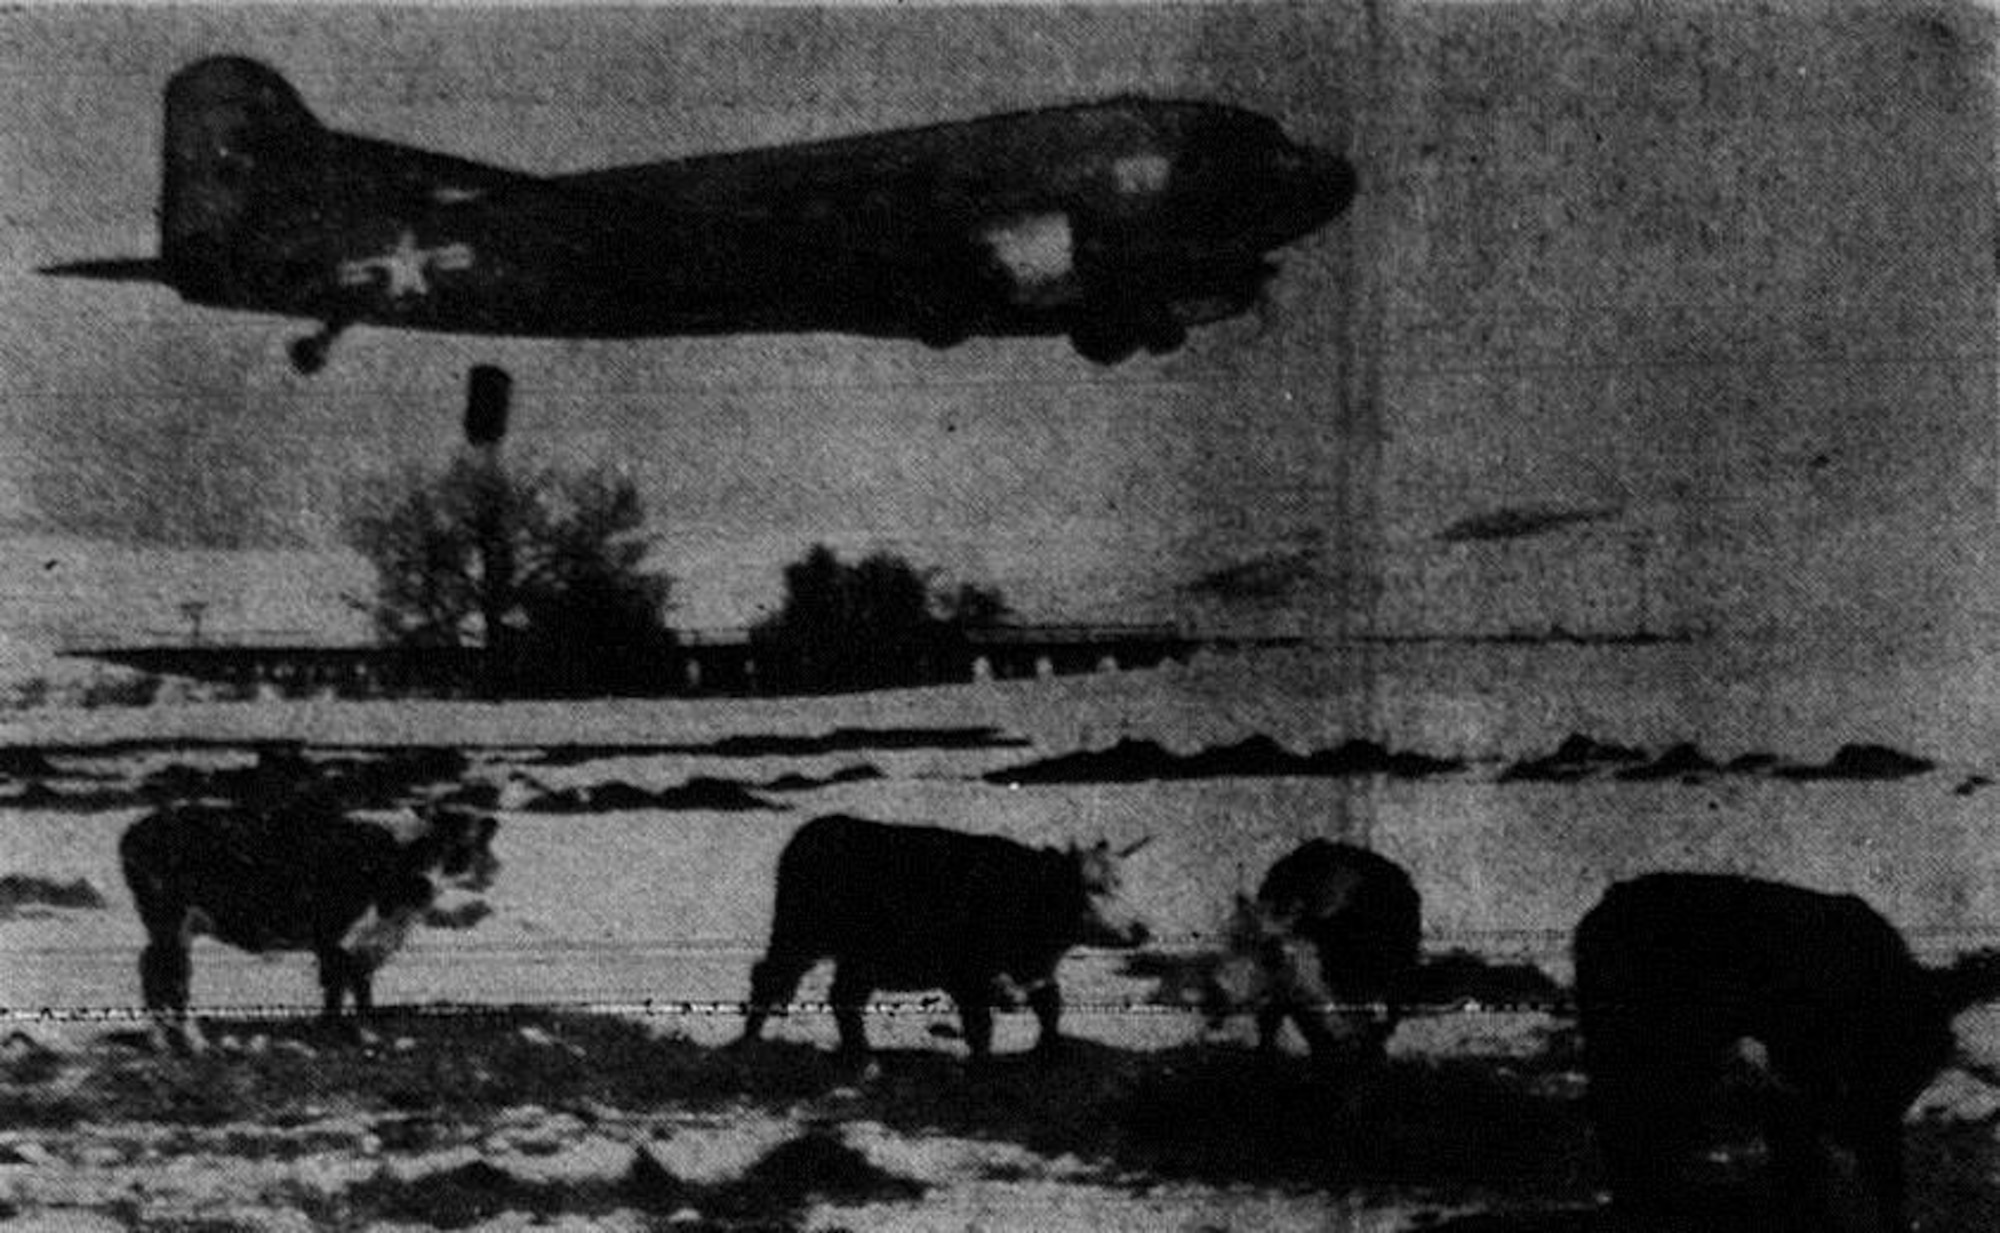 In the winter of 1948-1949, severe weather affected livestock and game all across the western United States.  Here, a USAF C-47 transport aircraft piloted by Capt. M. Peck drops a hay bale from low altitude to cattle on a ranch 12 miles northwest of Chadron, Nebraska, in another example of the peacetime application of airpower.  (Courtesy La Grande Observer, via Eastern Oregon University Library)